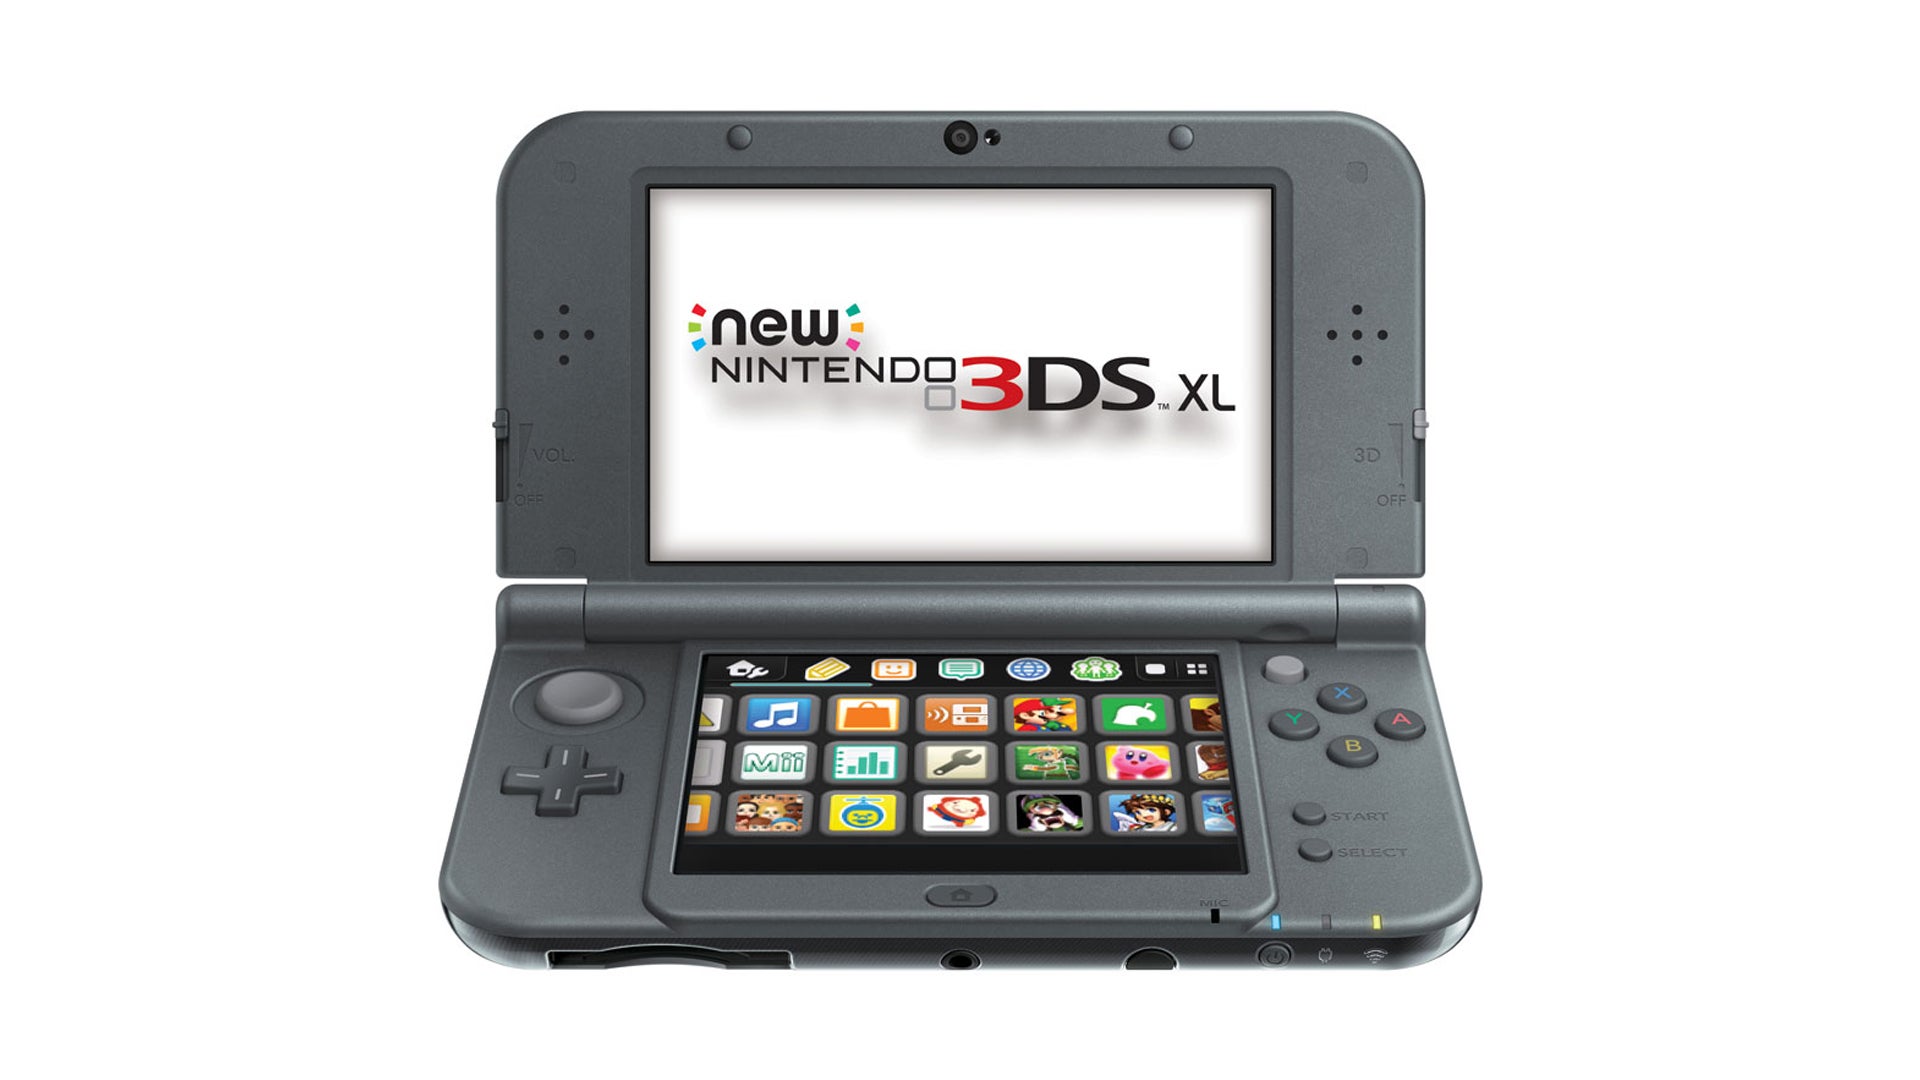 Image for Nintendo reiterates, again, it will continue to support 3DS as long as there's consumer demand